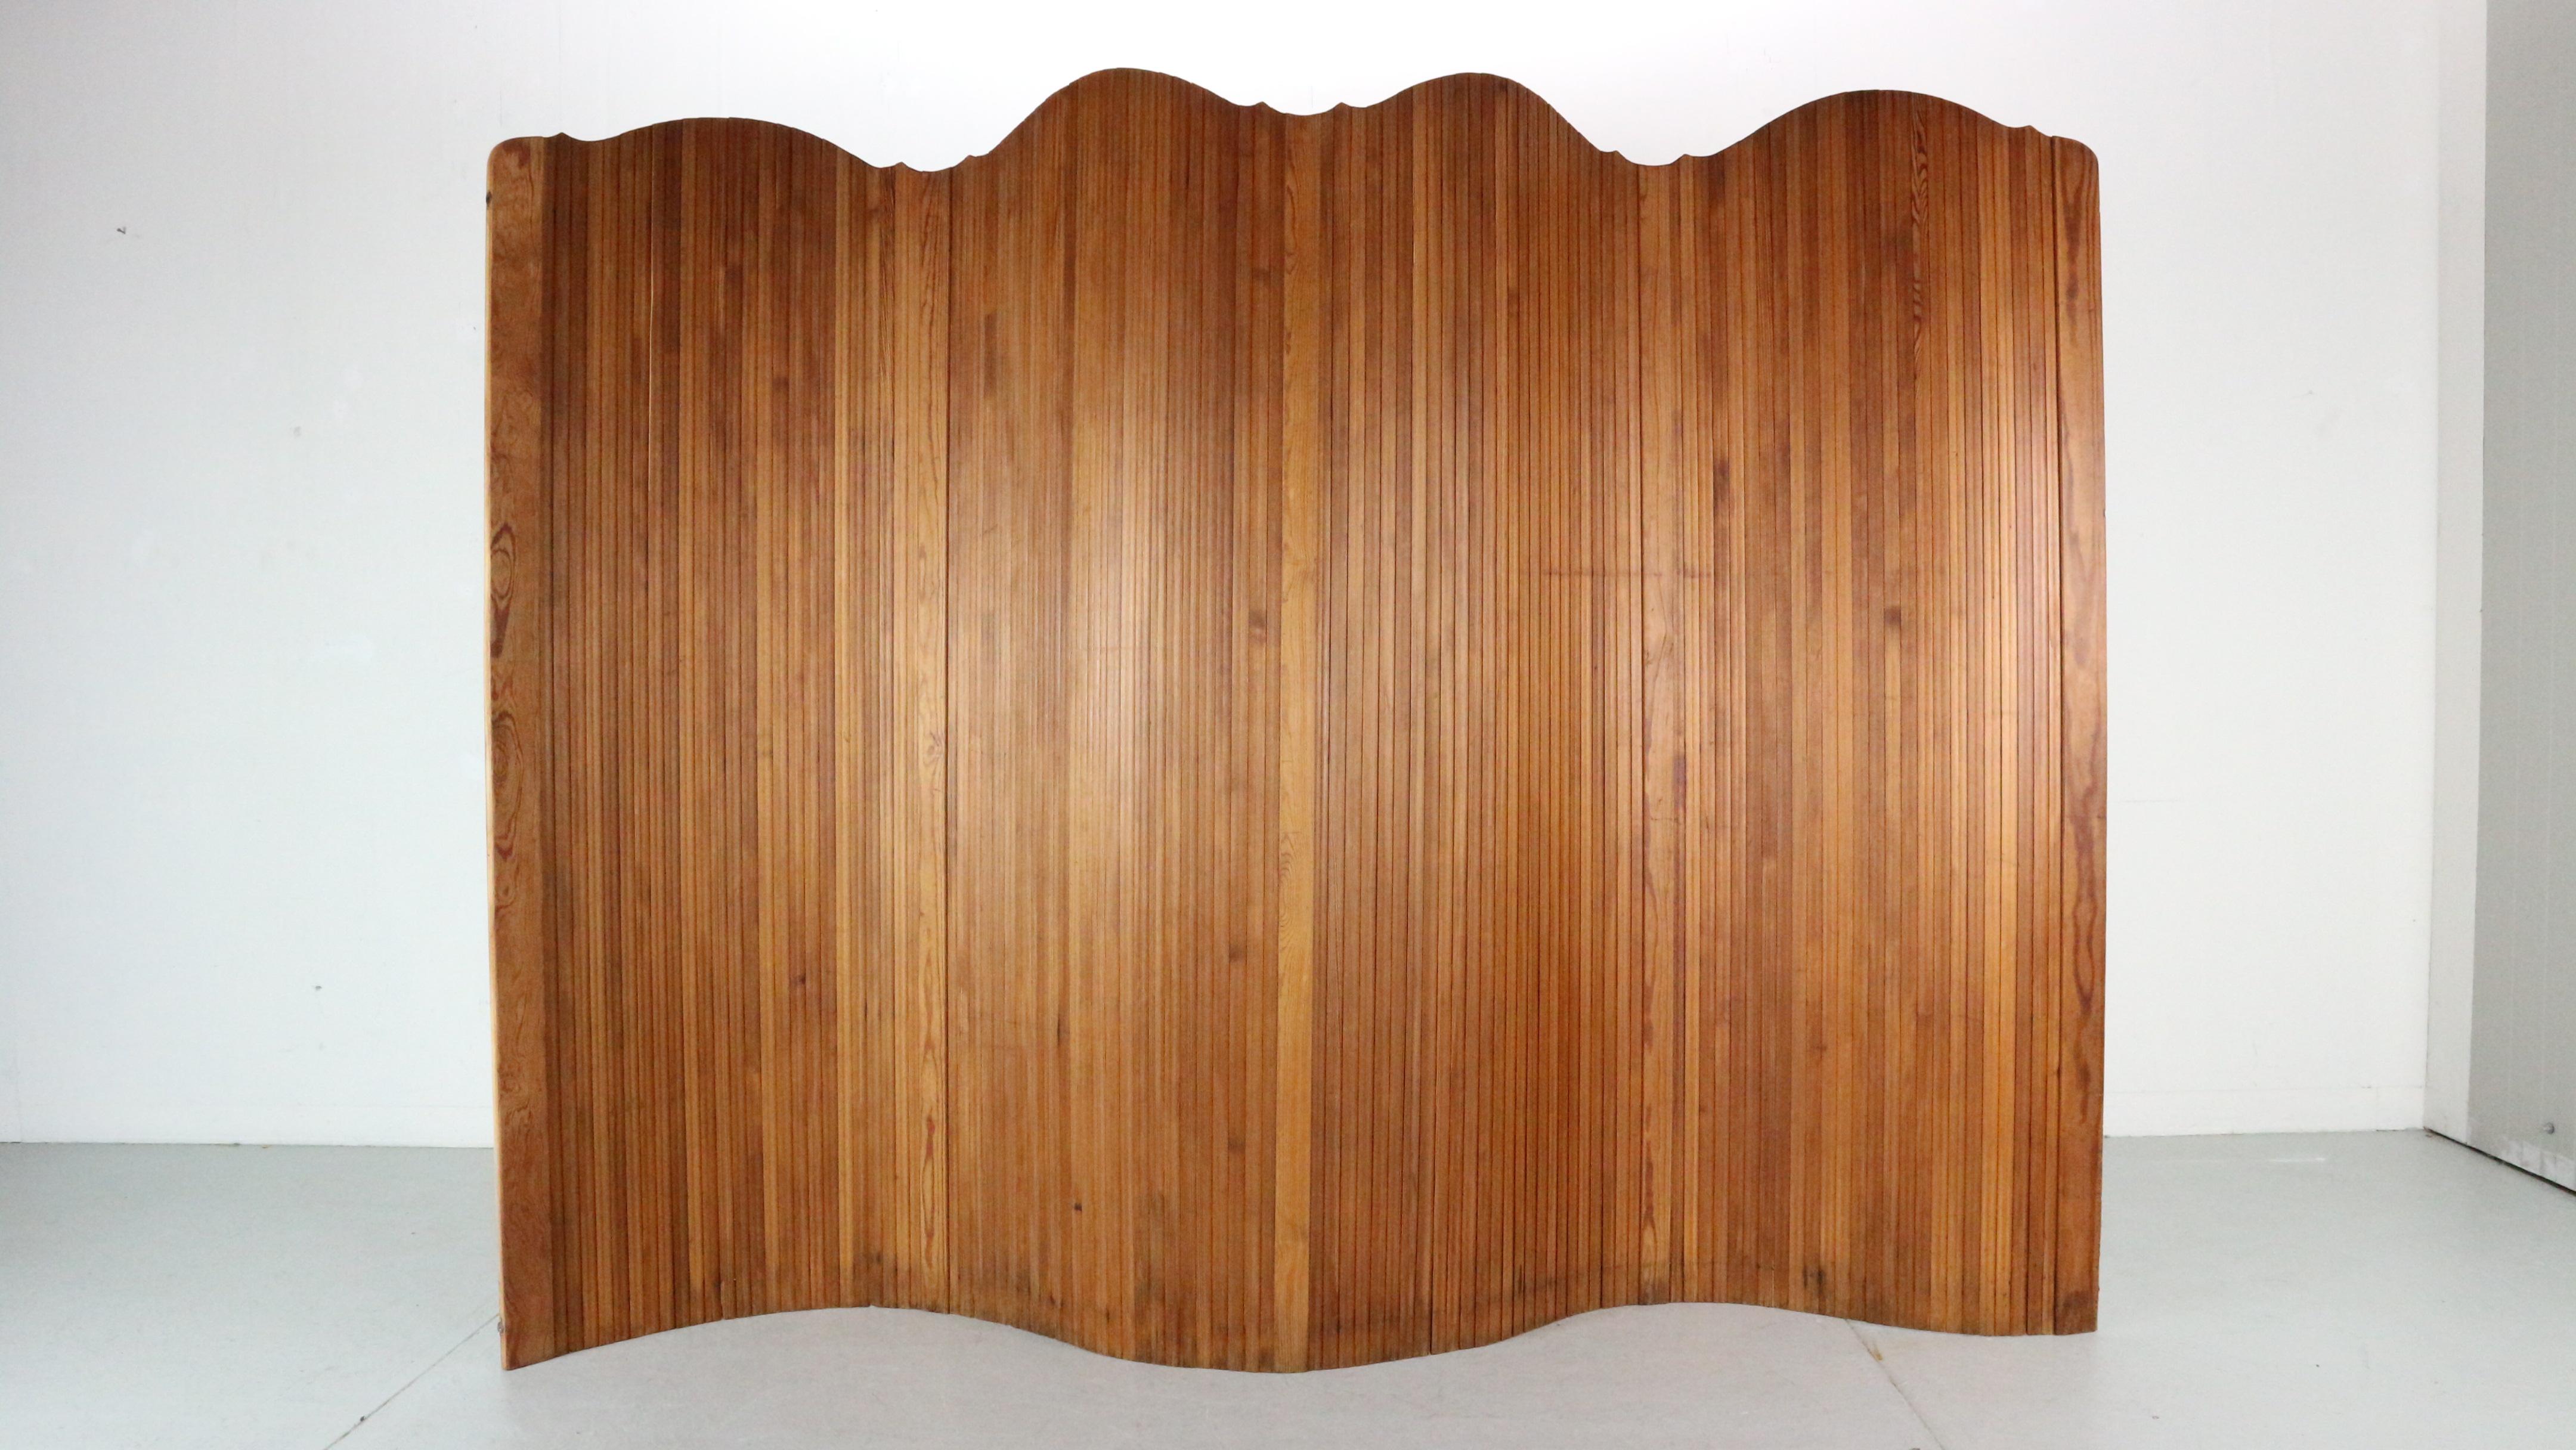 Large 1920s Tambour screen by the French manufacturer S.N.S.A. Made in stained pitchpine.
Its flexible structure allows it to stand freely and shape curves, perfect for a dressing room or as a room divider, can also be rolled up for easy